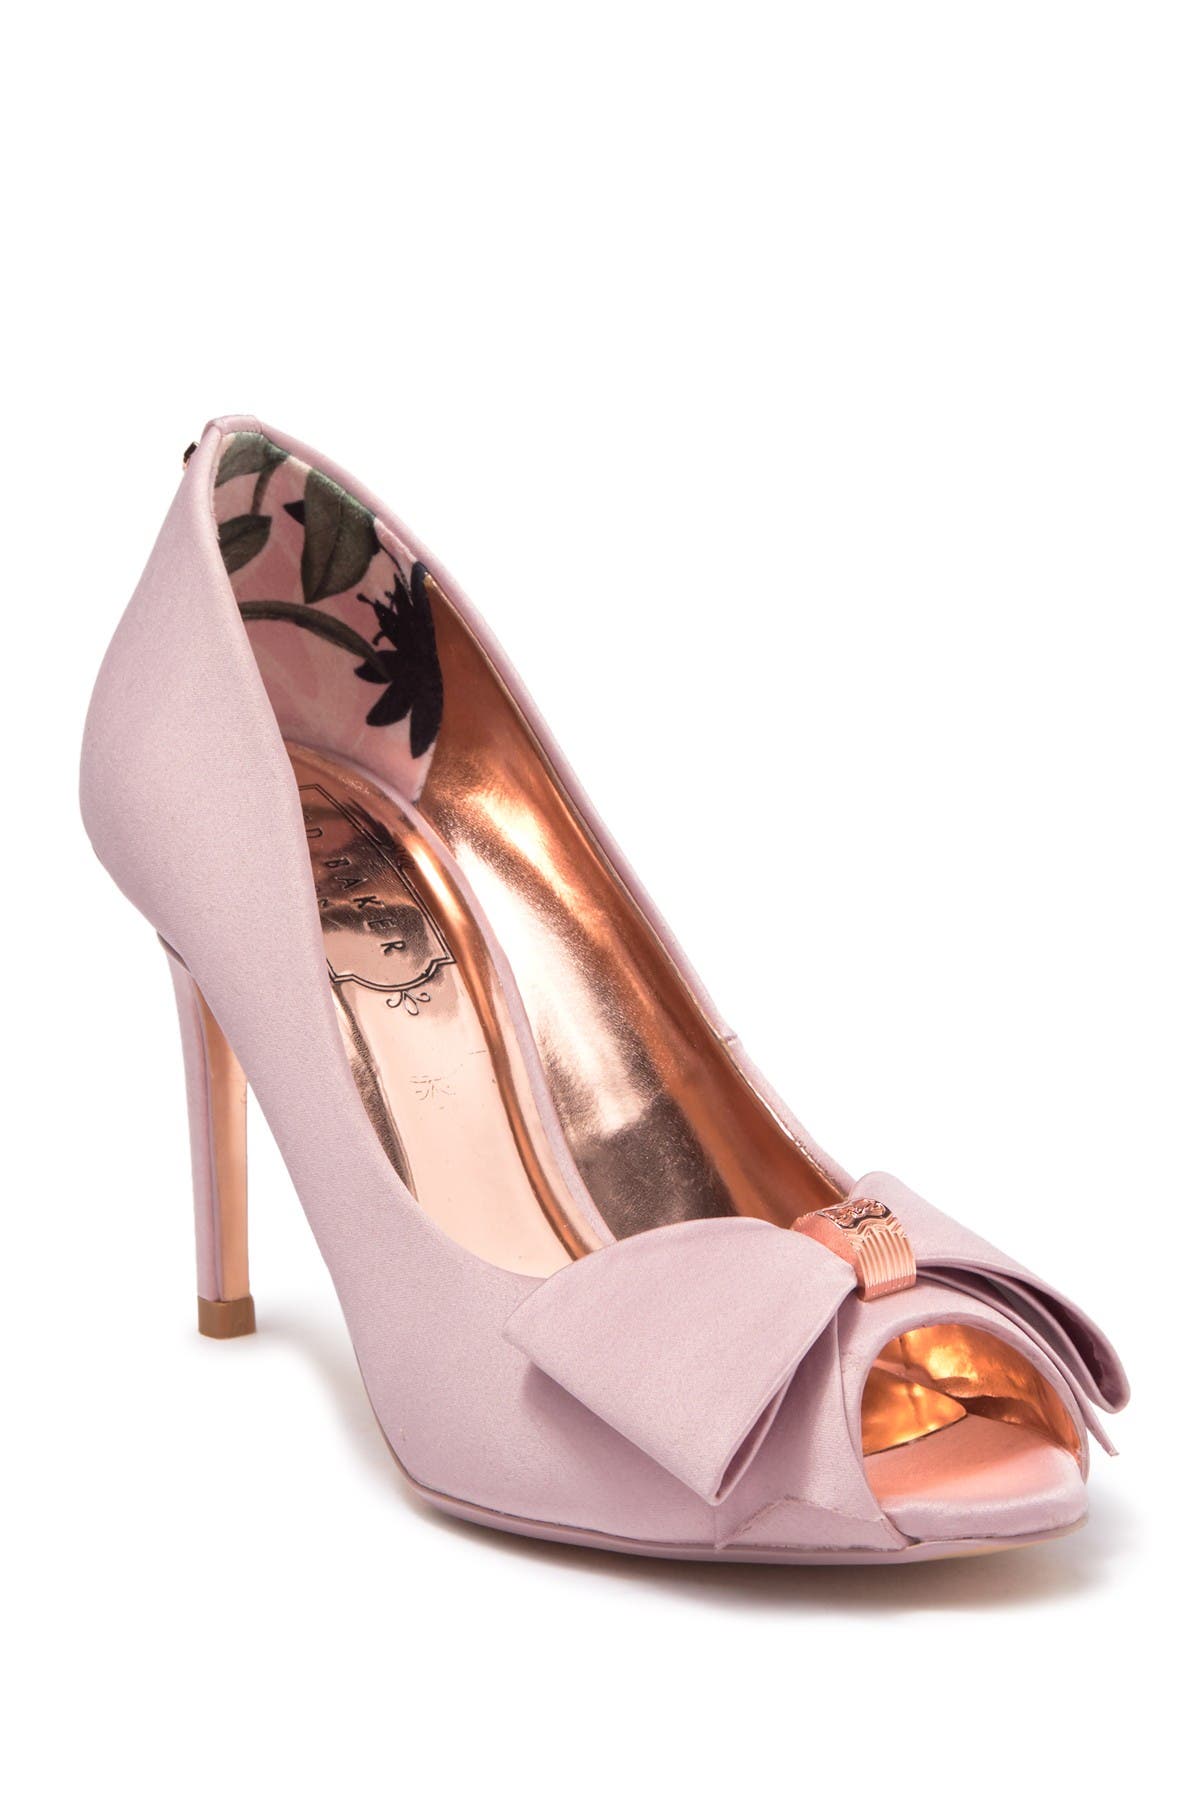 ted baker bow sandals